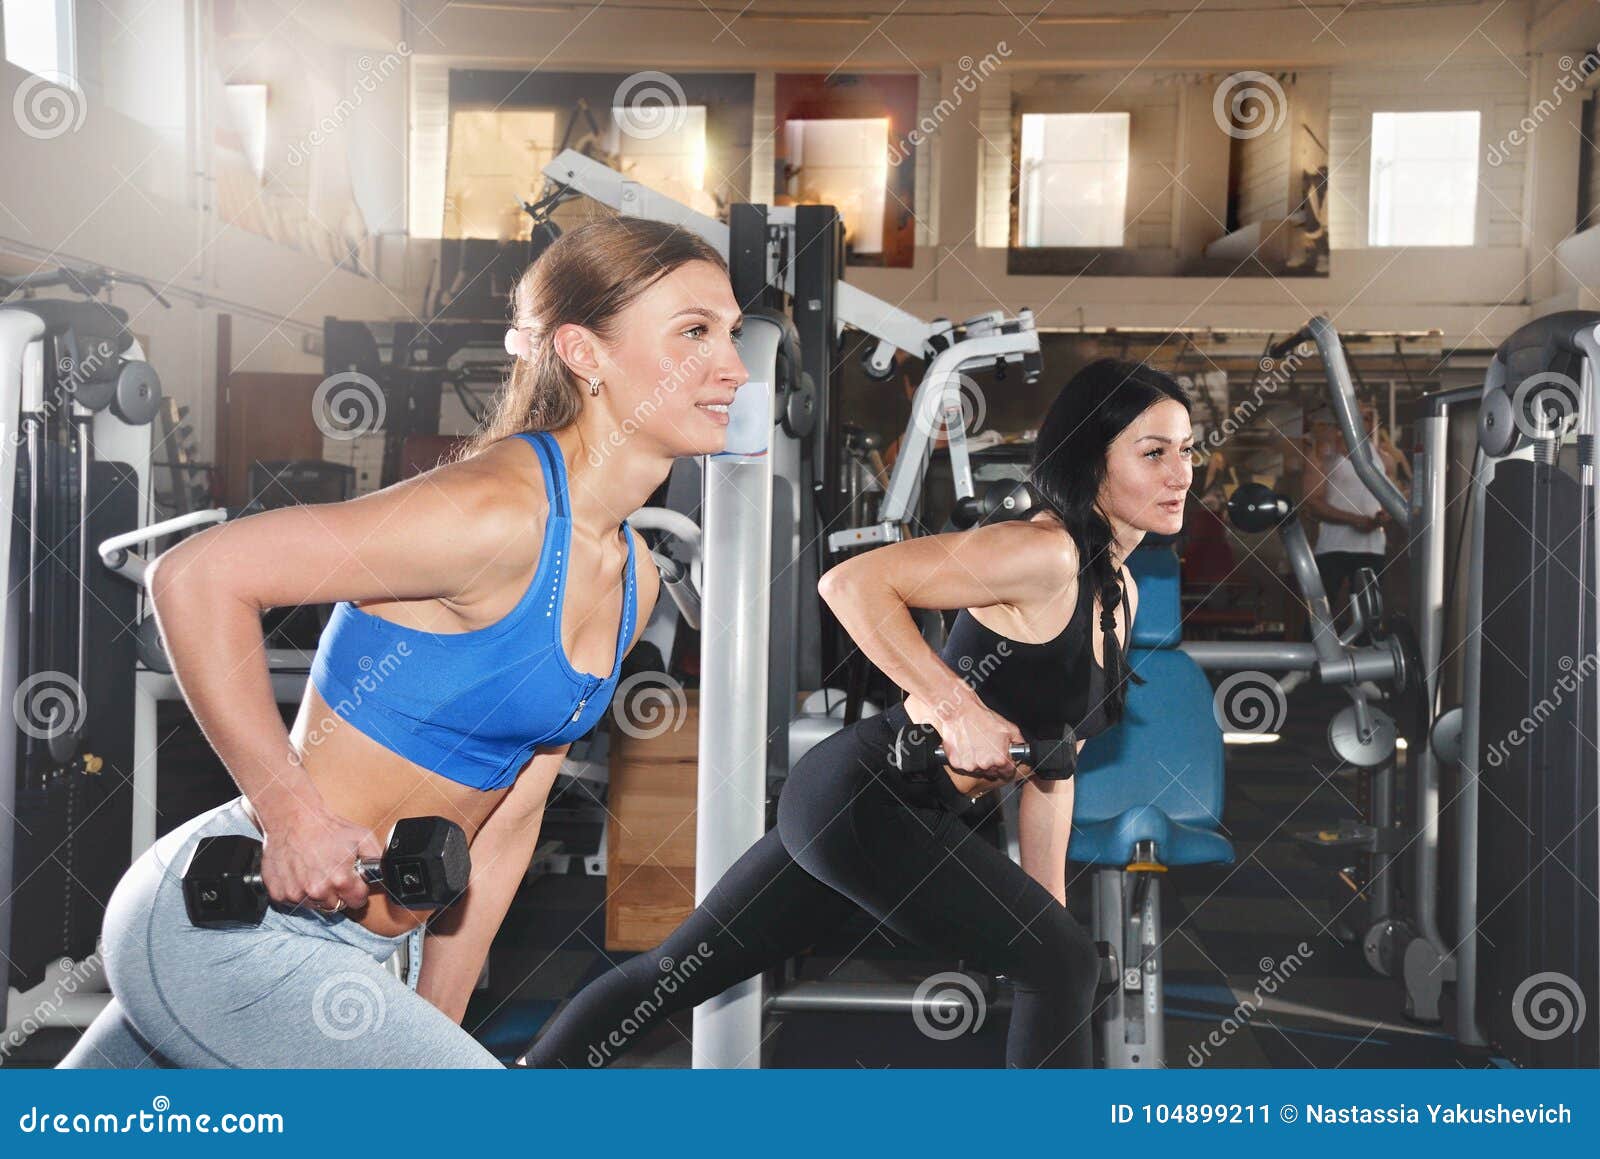 Two Fitness Girls Lifting Dumbbells in the Gym Stock Image - Image of ...